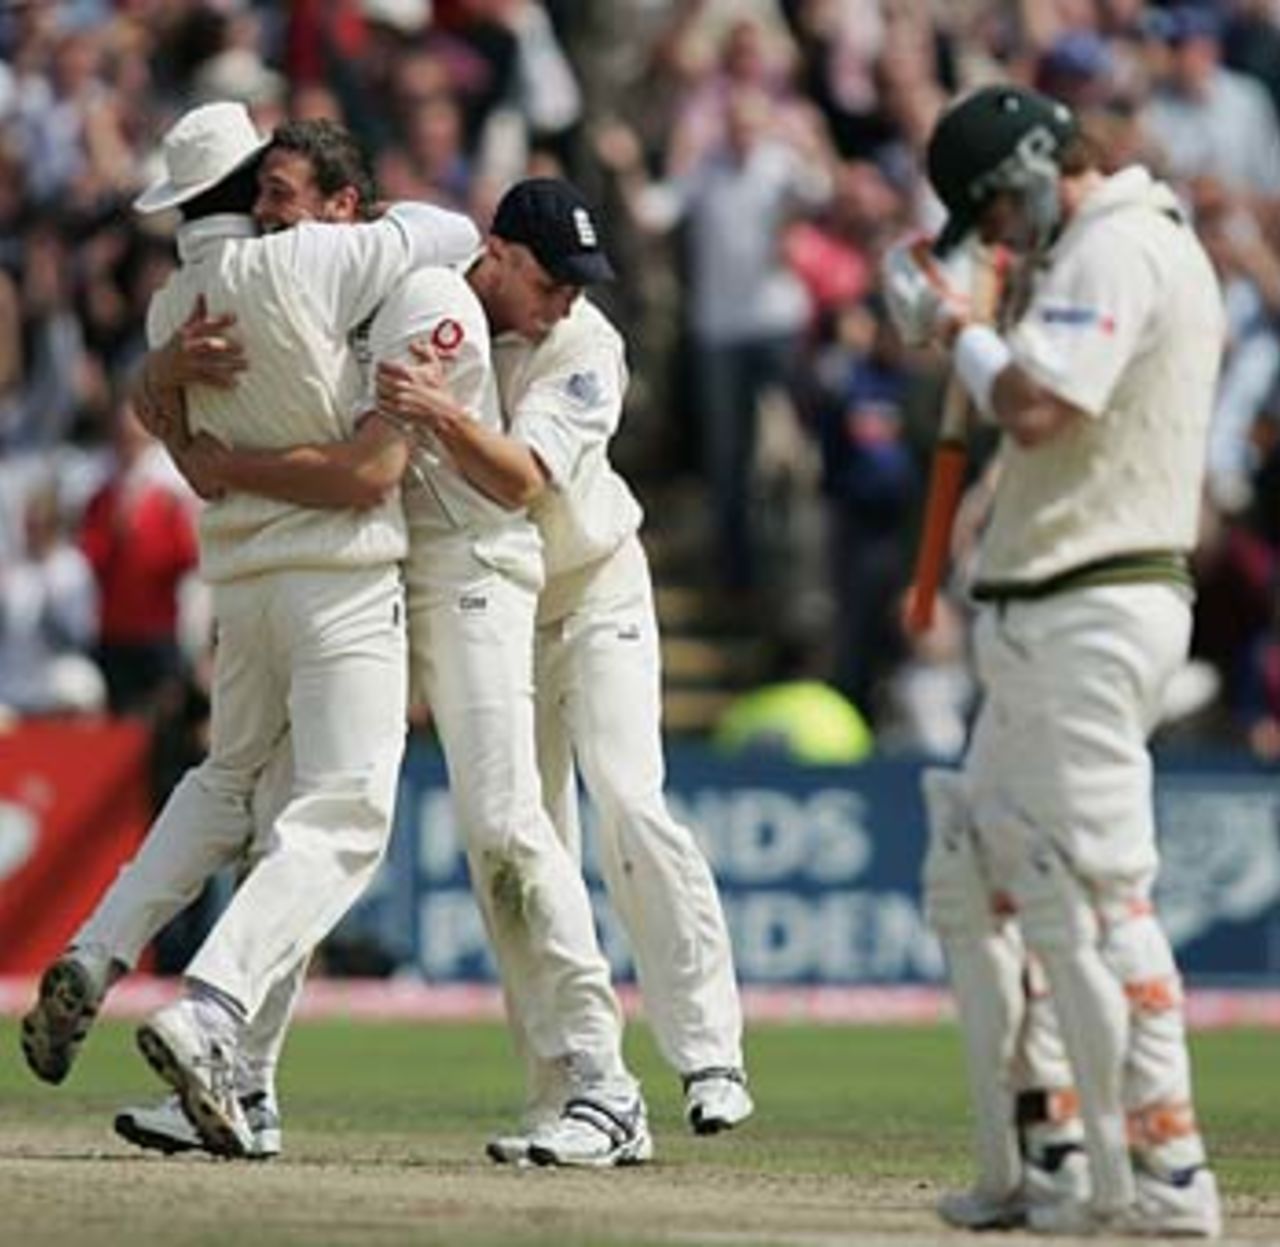 Damien Martyn is astounded as England celebrate his controversial lbw, England v Australia, 3rd Test, Old Trafford, August 15, 2005